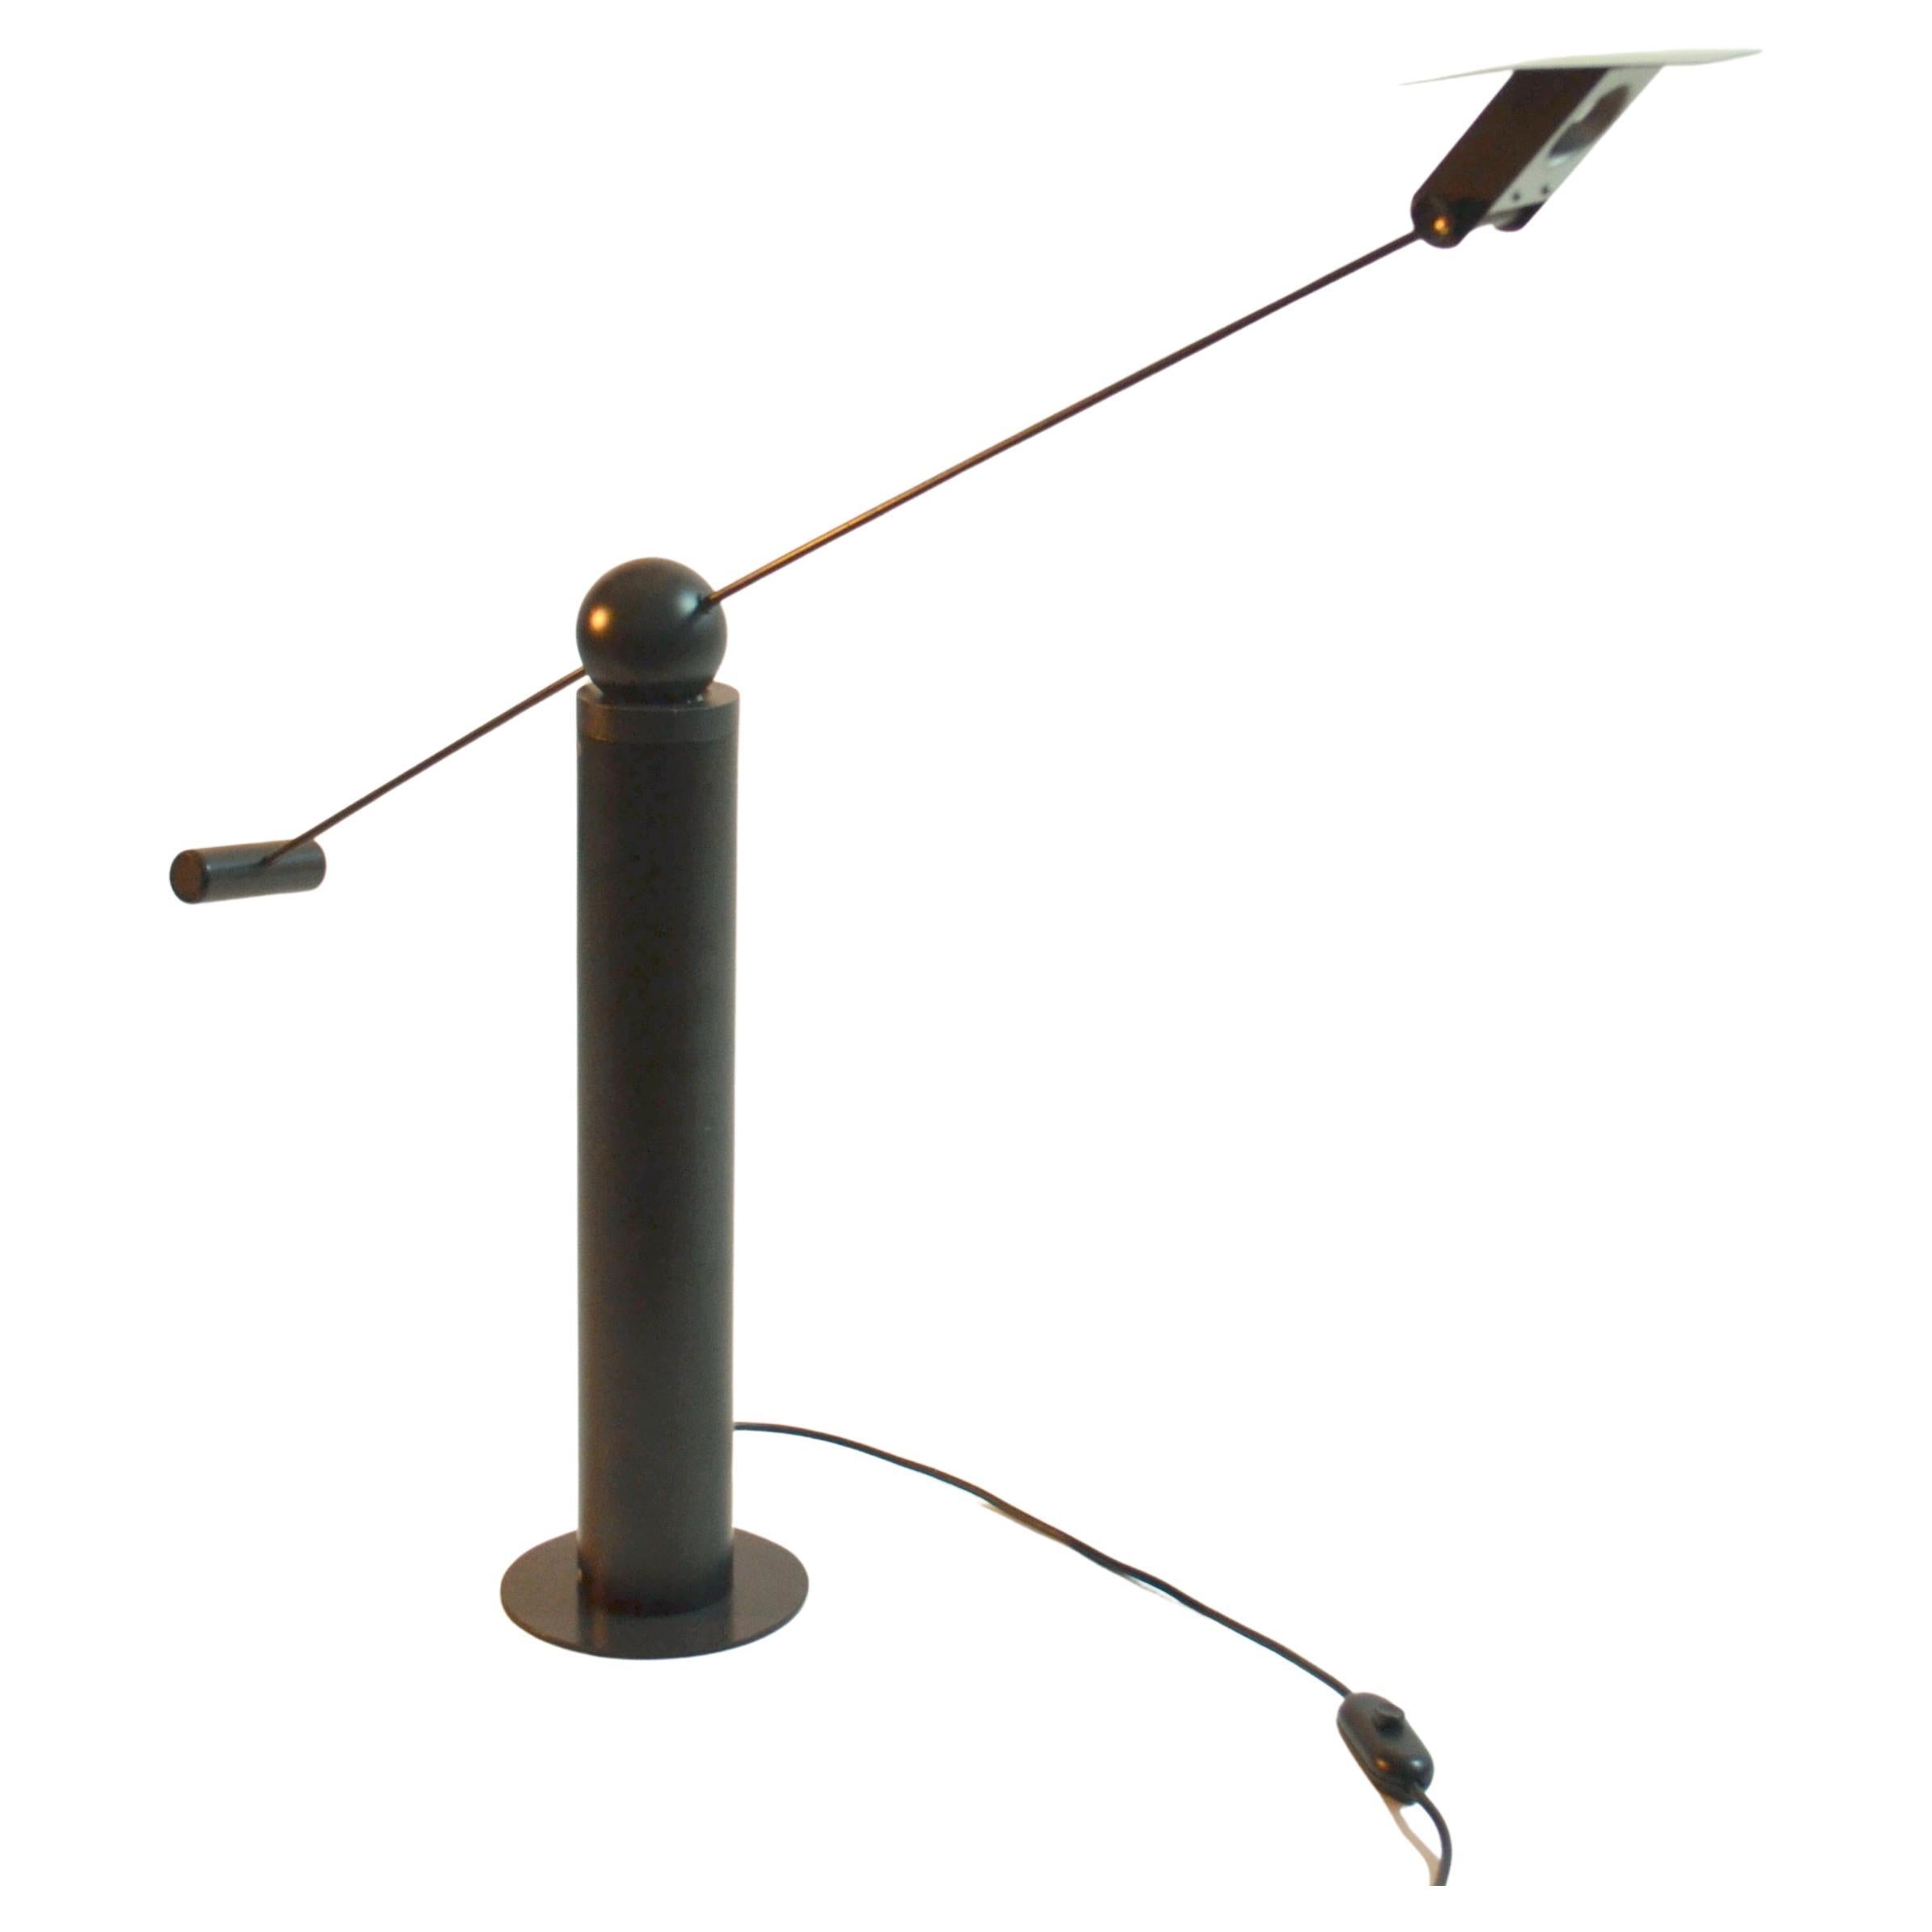 Minimalist Counterbalance Black Table Lamp Attributed to Swiss Baltensweiler In Excellent Condition For Sale In London, GB